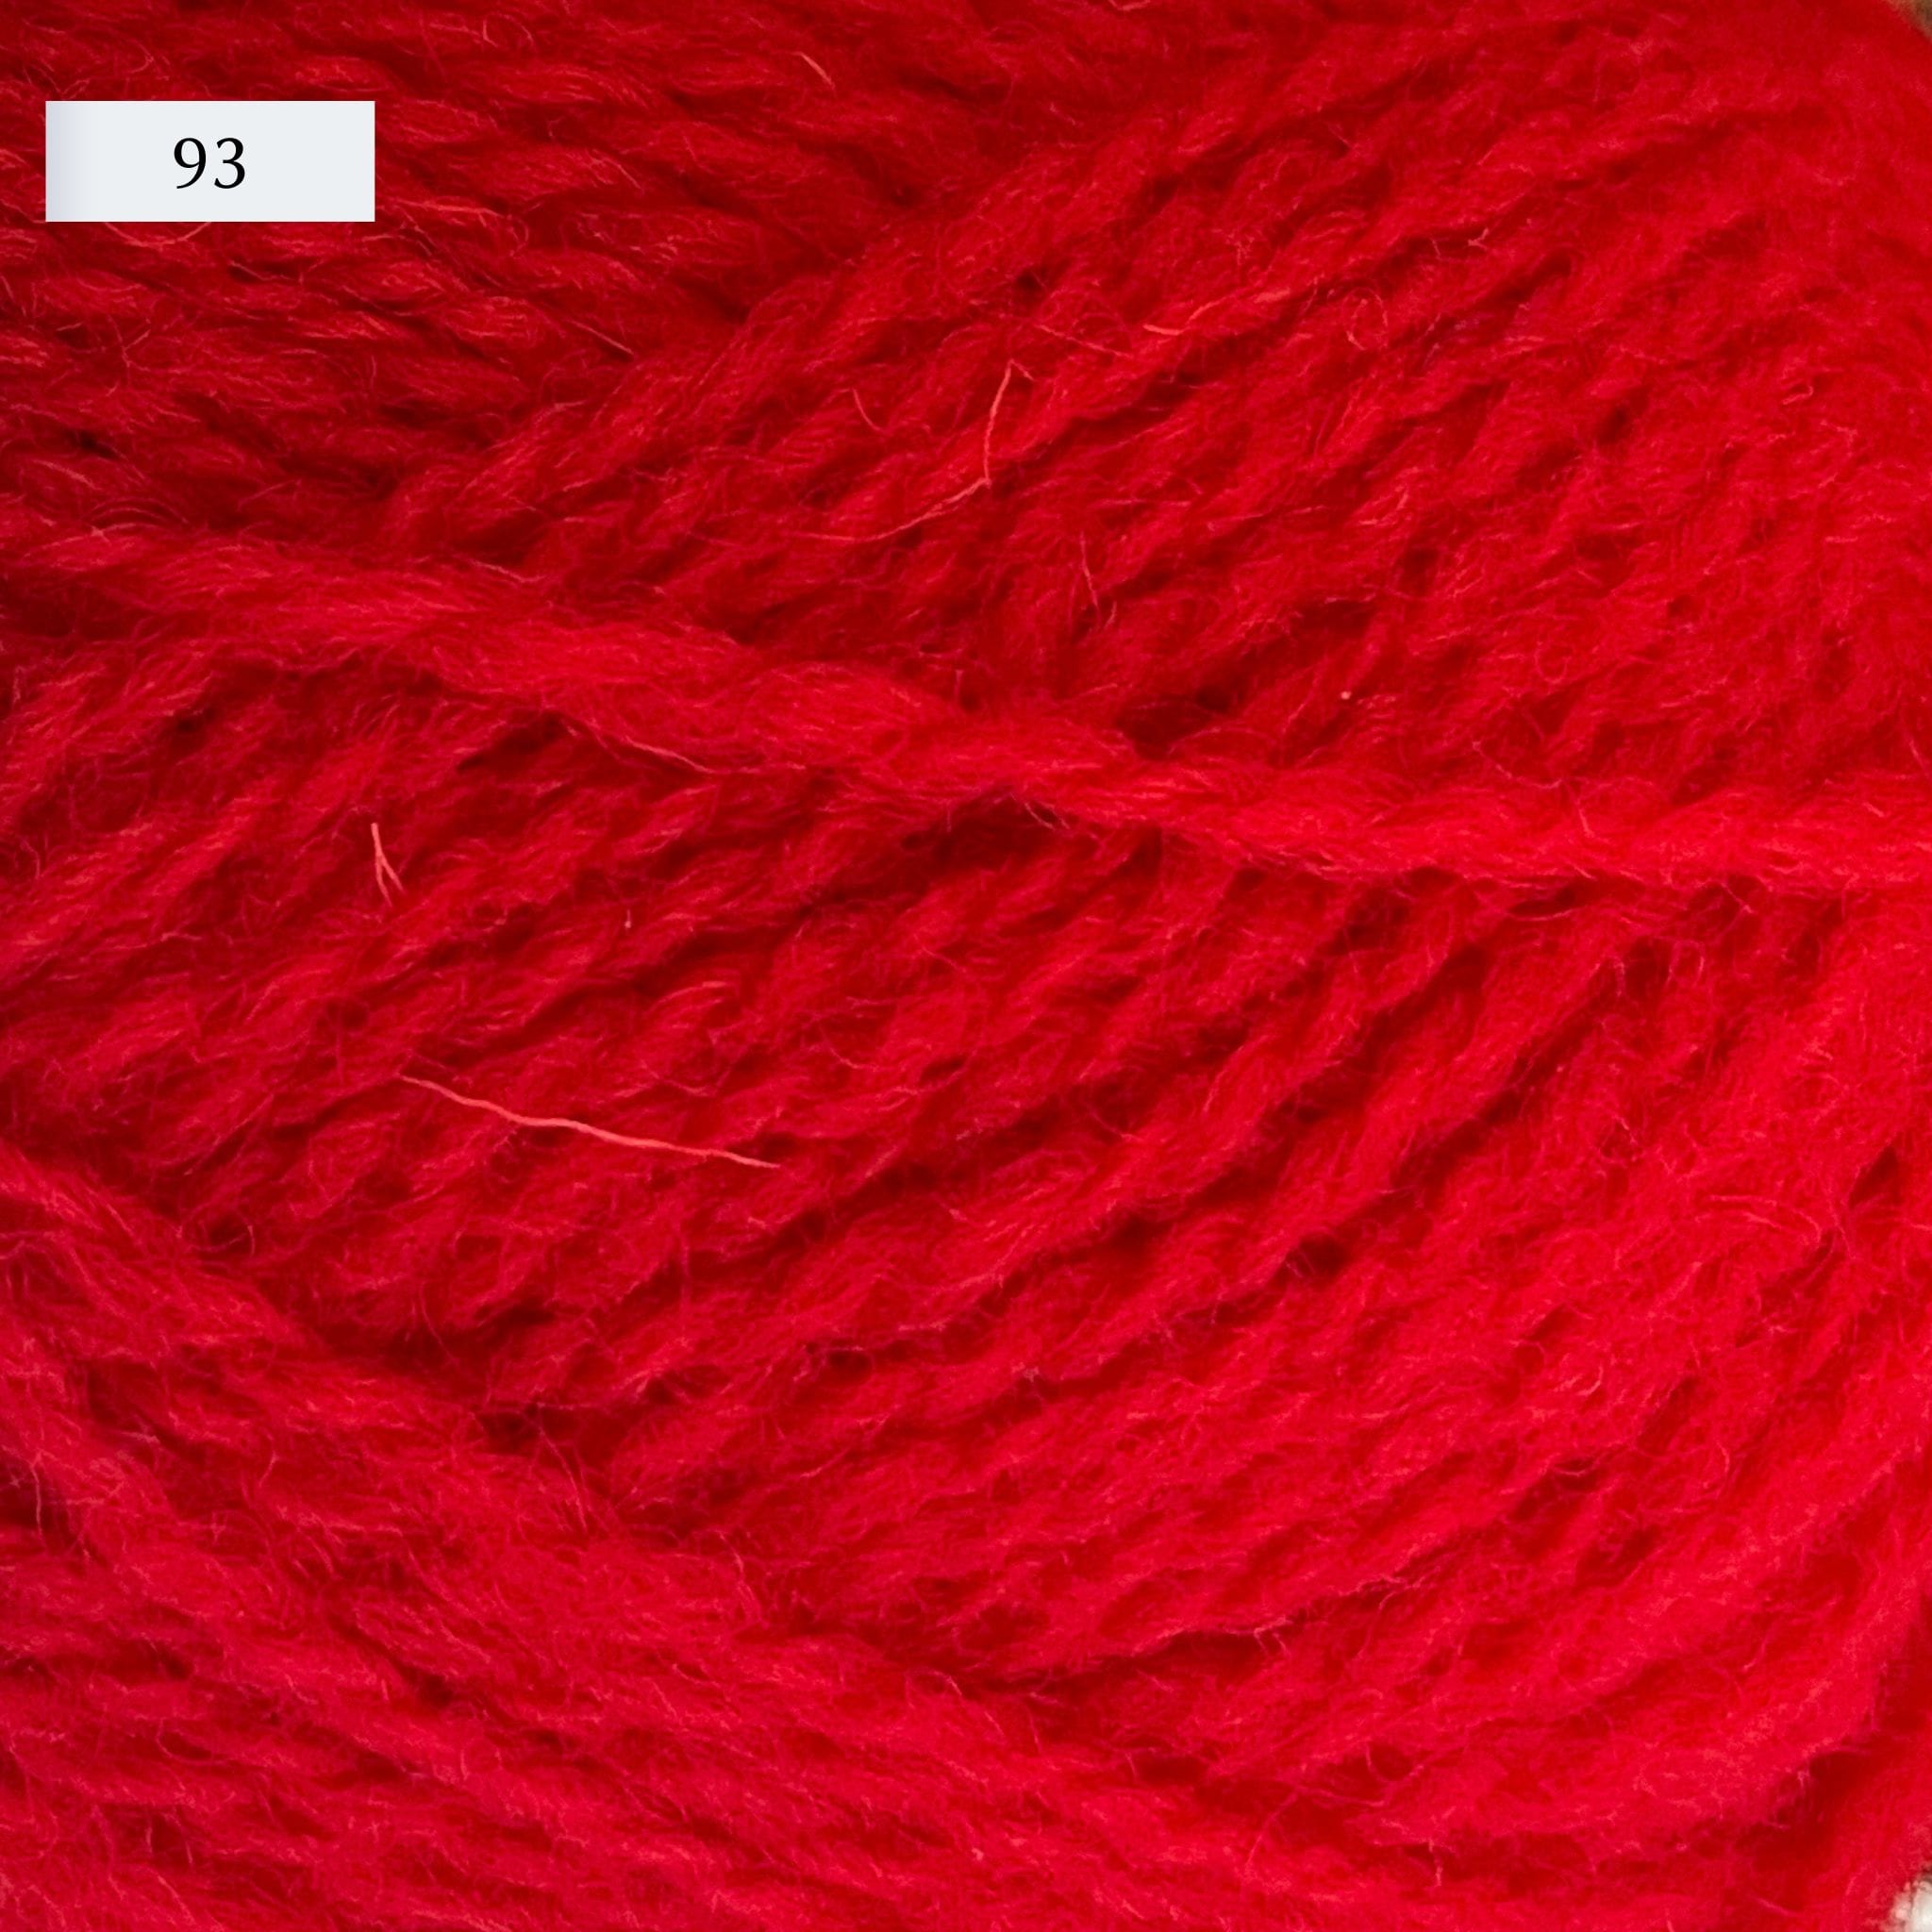 Jamieson & Smith 2ply Jumper Weight, light fingering weight yarn, in color 93, bright holiday red